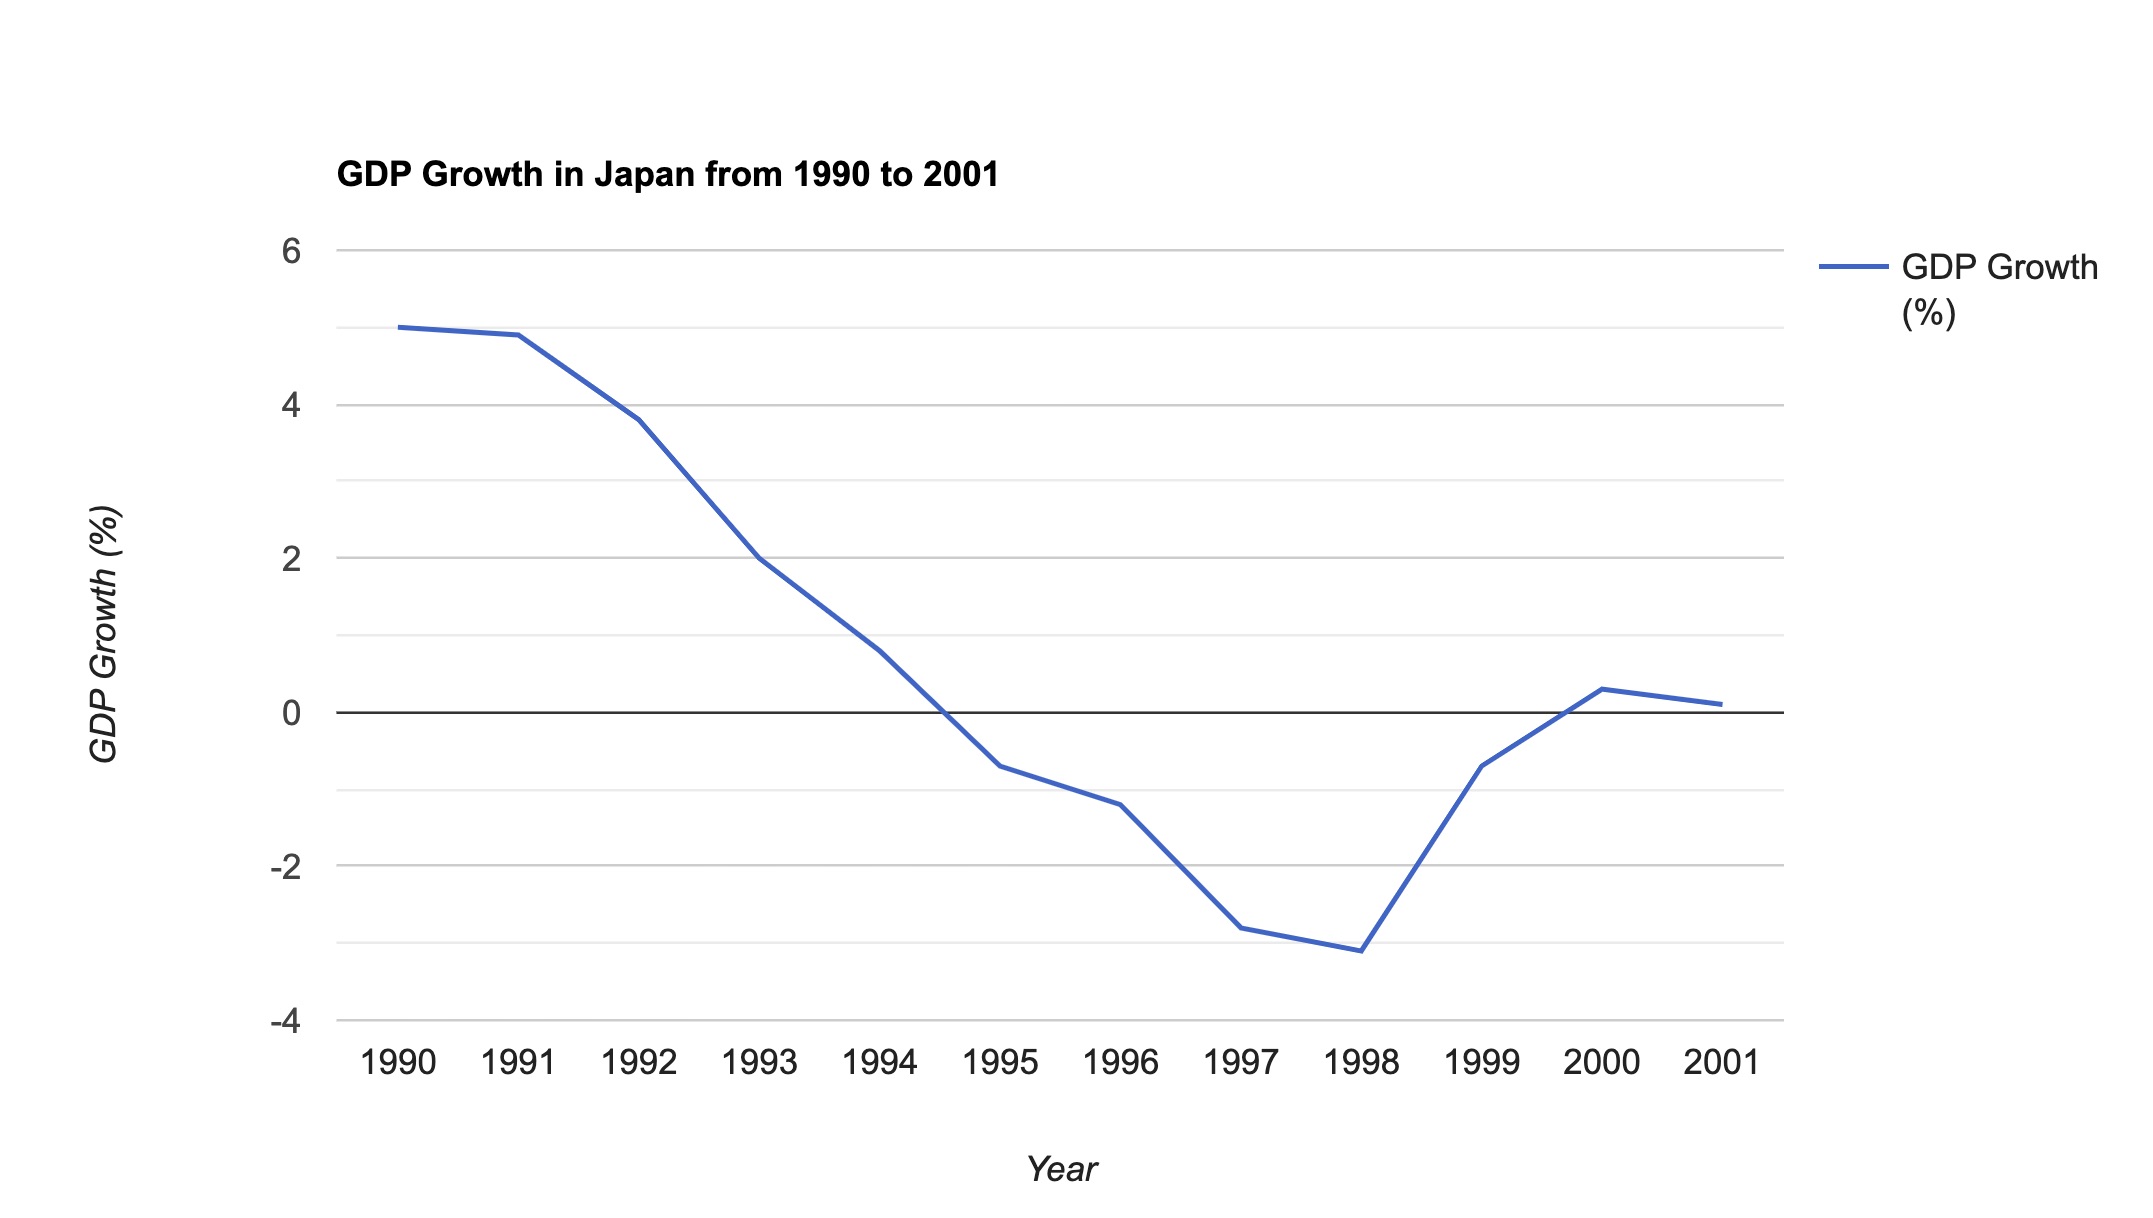 GDP growth in Japan from 1990 to 2001